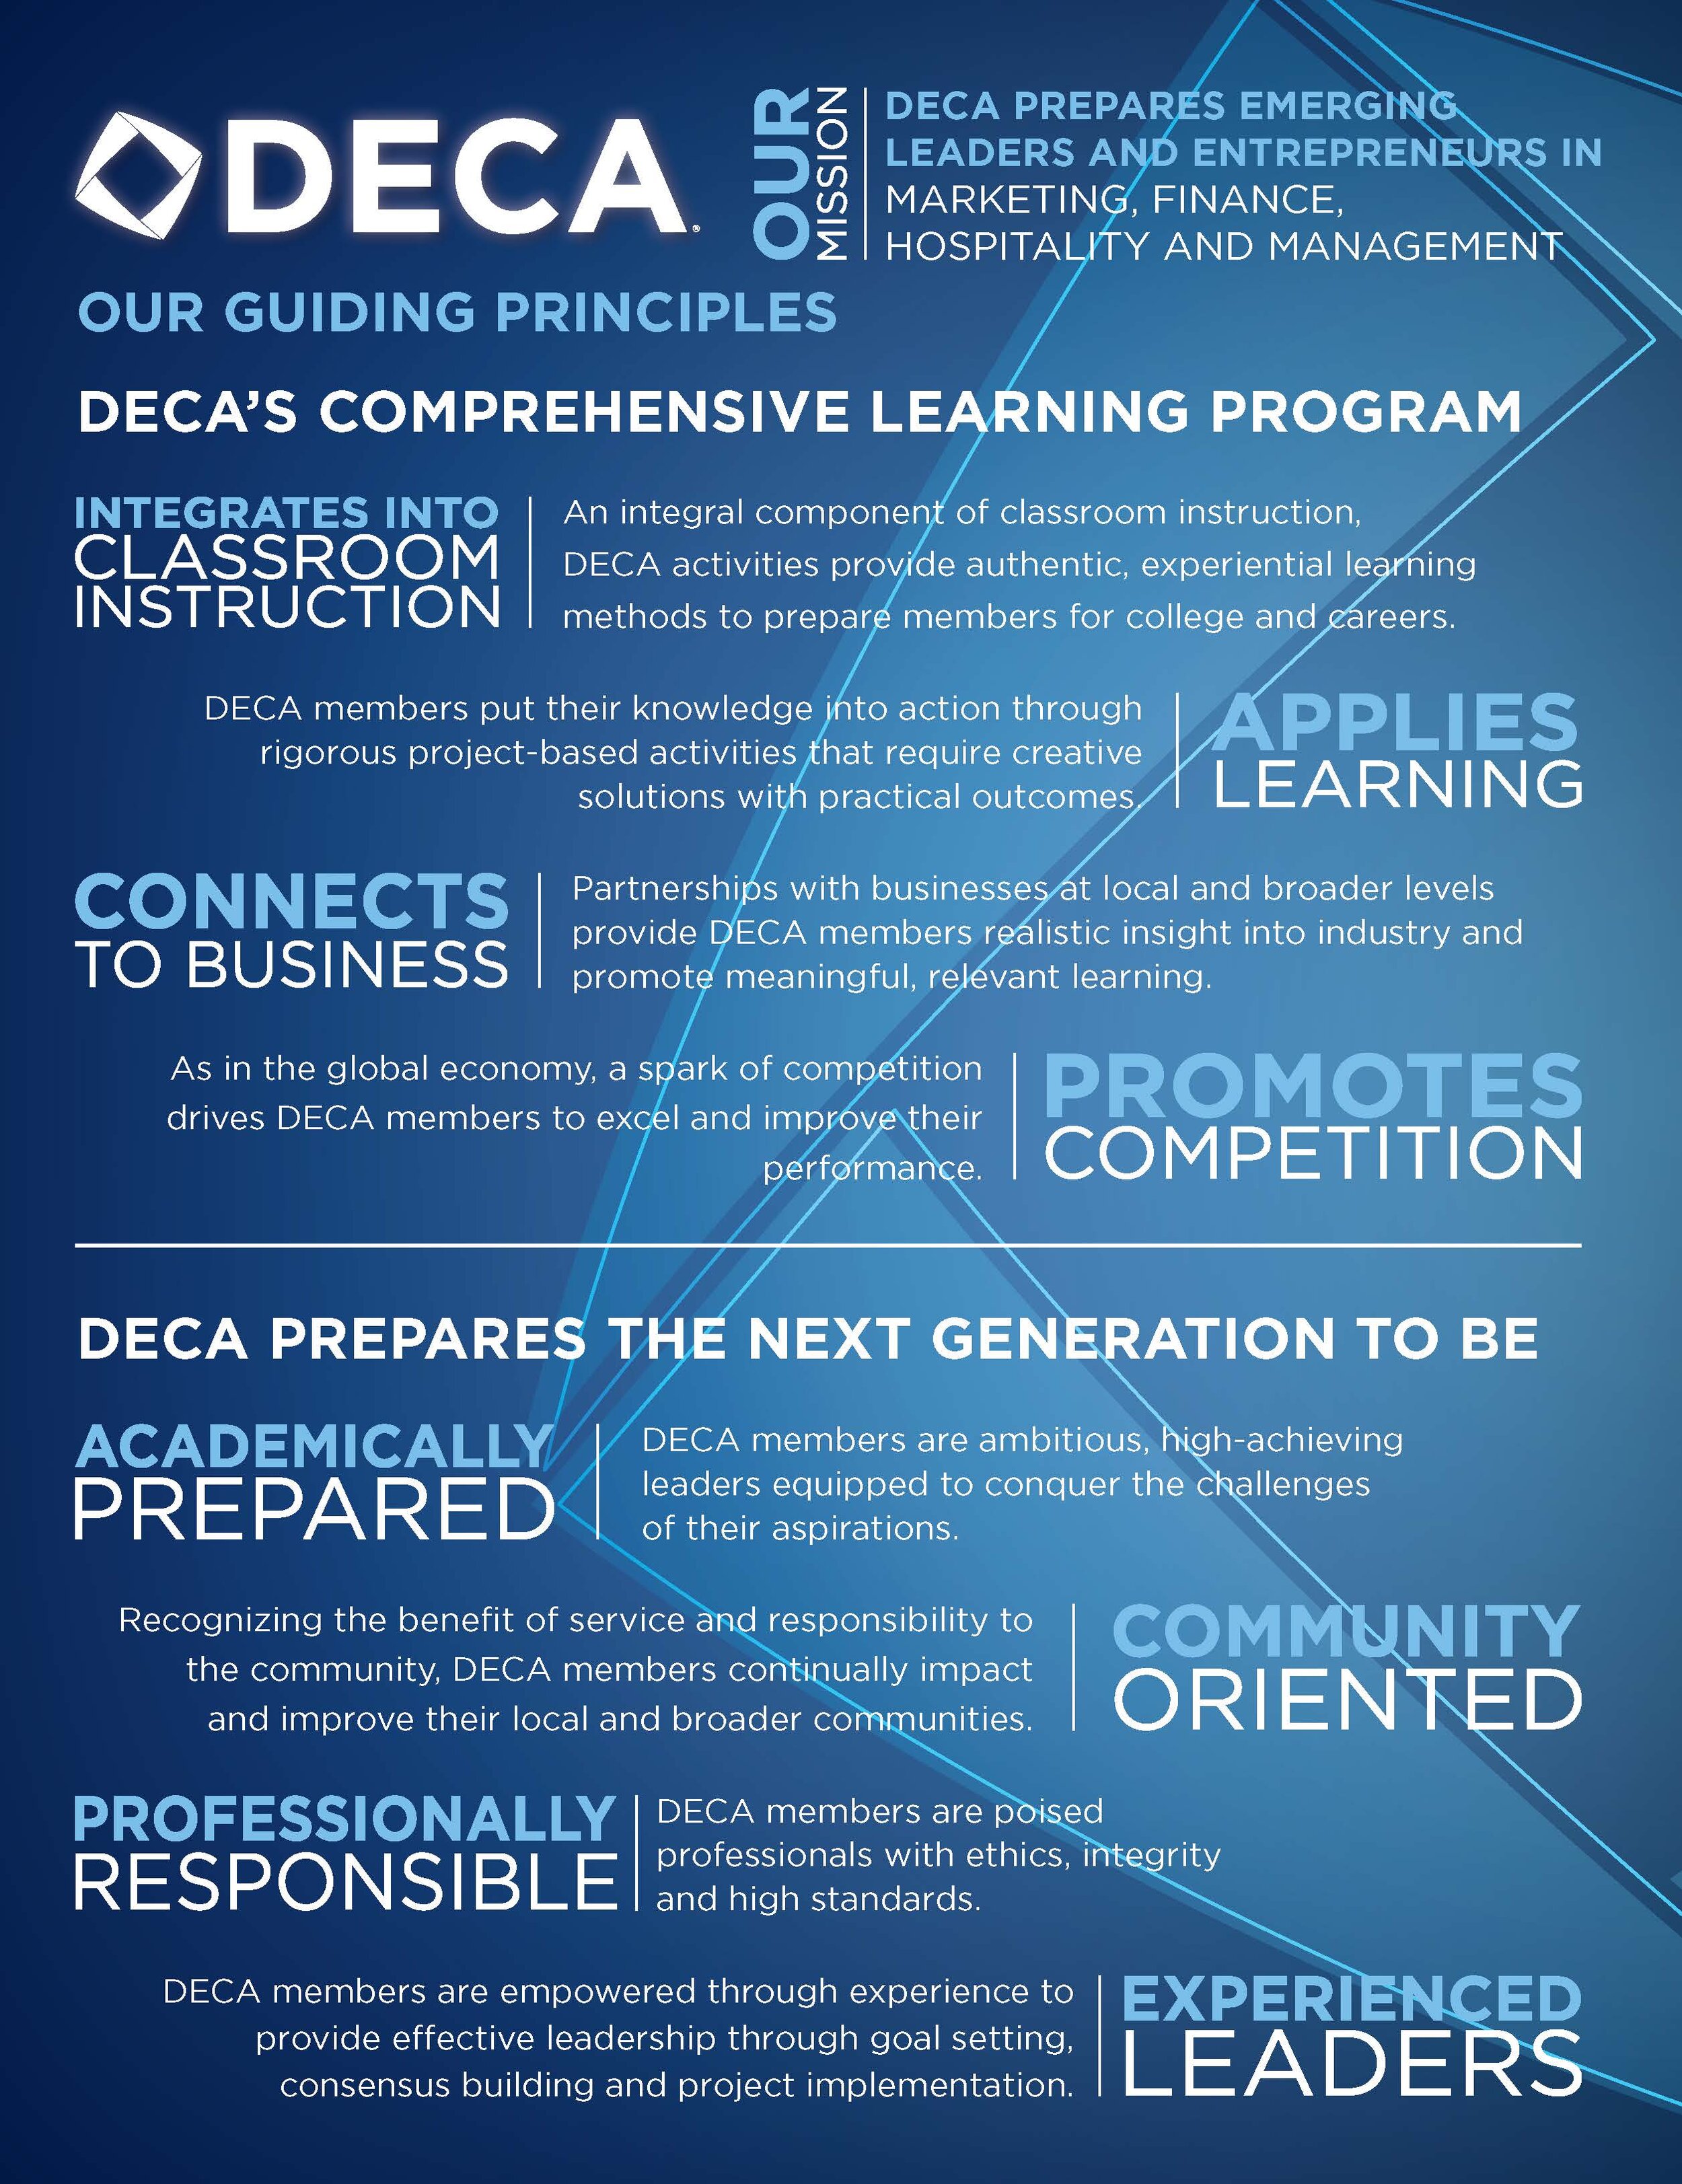 DECA-2020-HS-Guide_Page_142.jpg